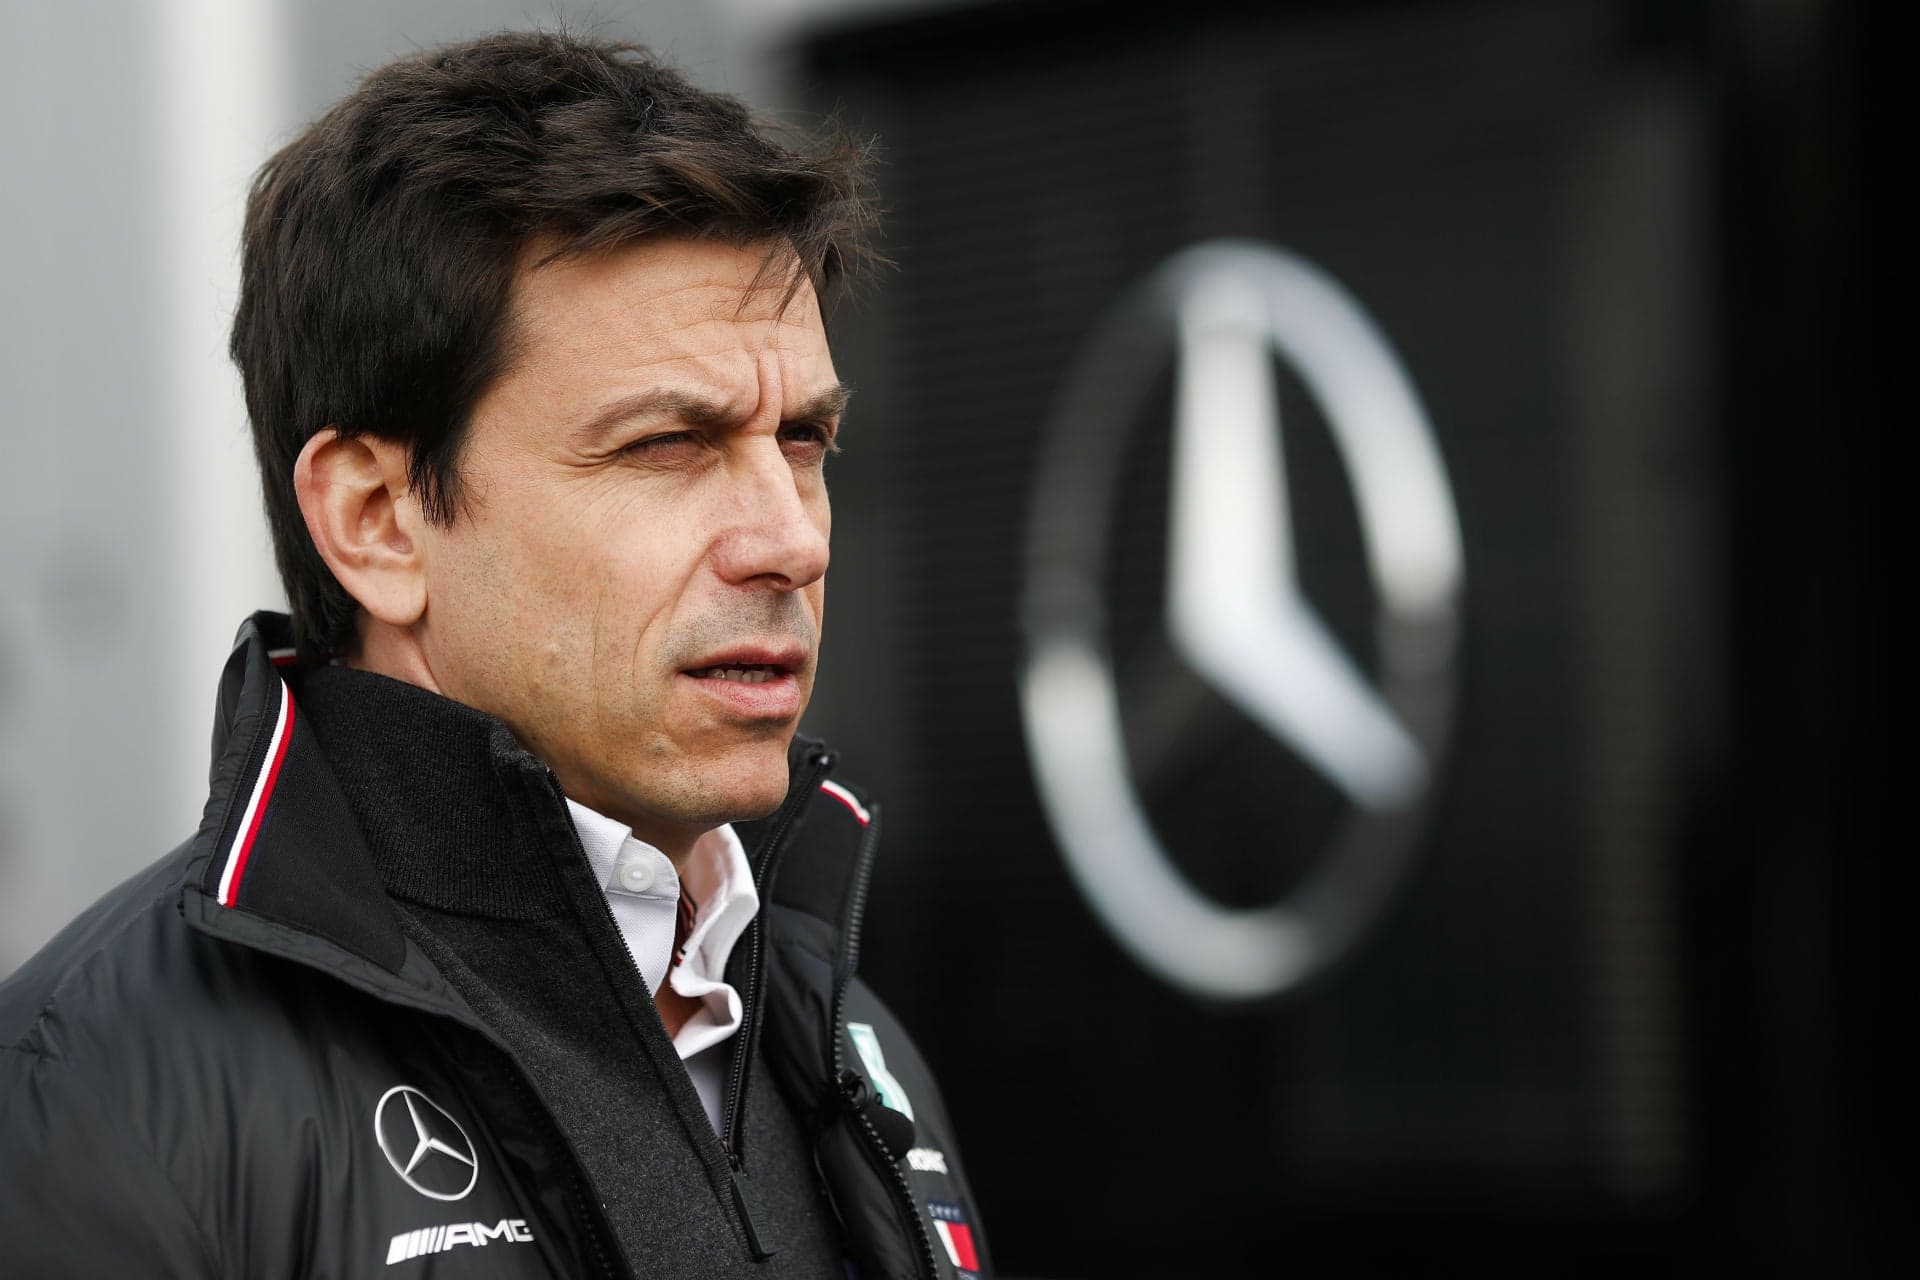 F1: Mercedes Boss Toto Wolff Says Teams ‘Don’t Have the Balls’ to Commit to Ocon